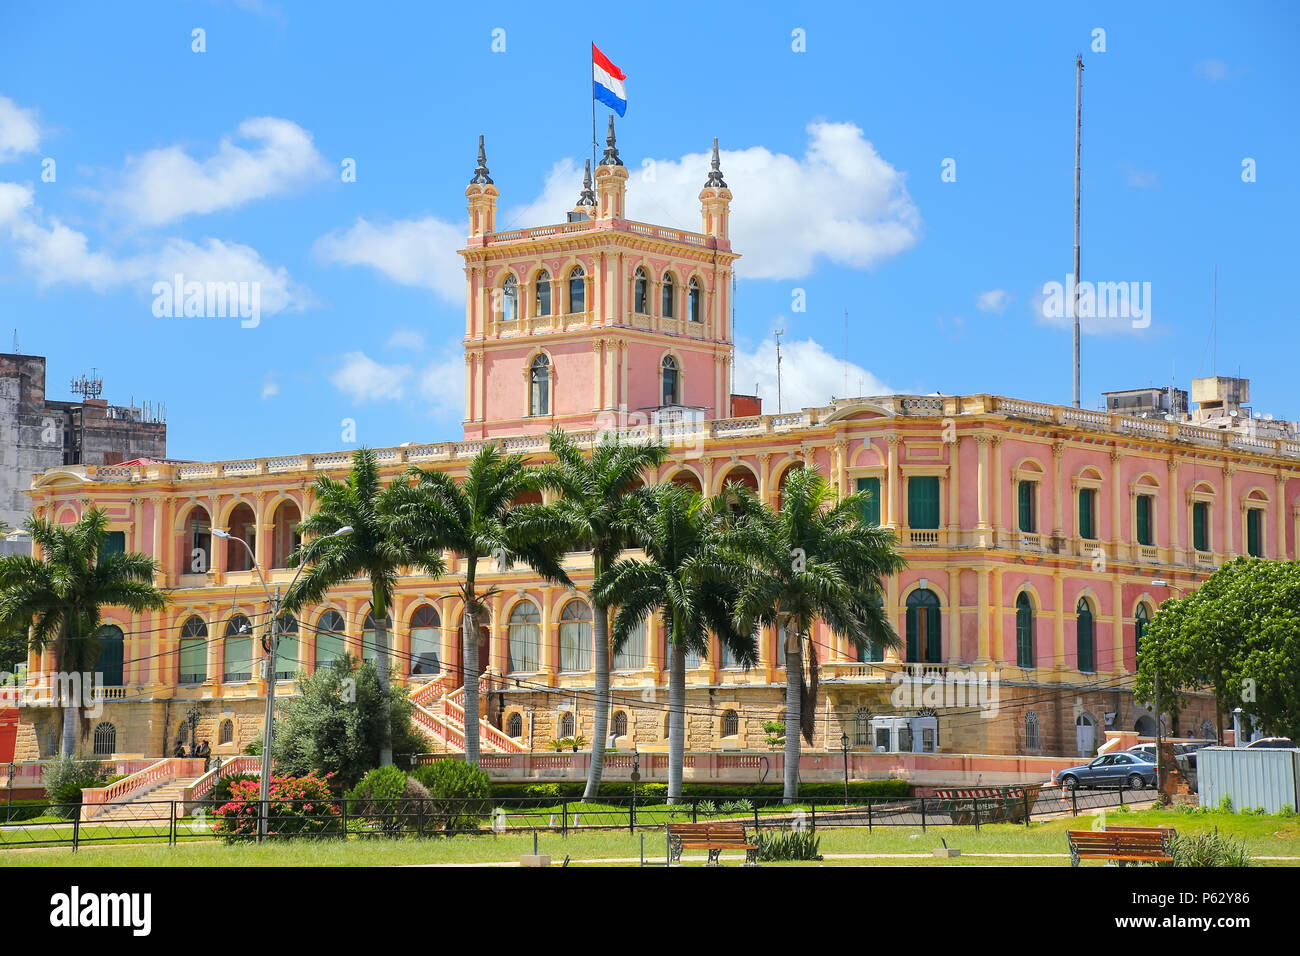 Presidential Palace in Asuncion, Paraguay. It serves as a workplace for the President and the government of Paraguay. Stock Photo